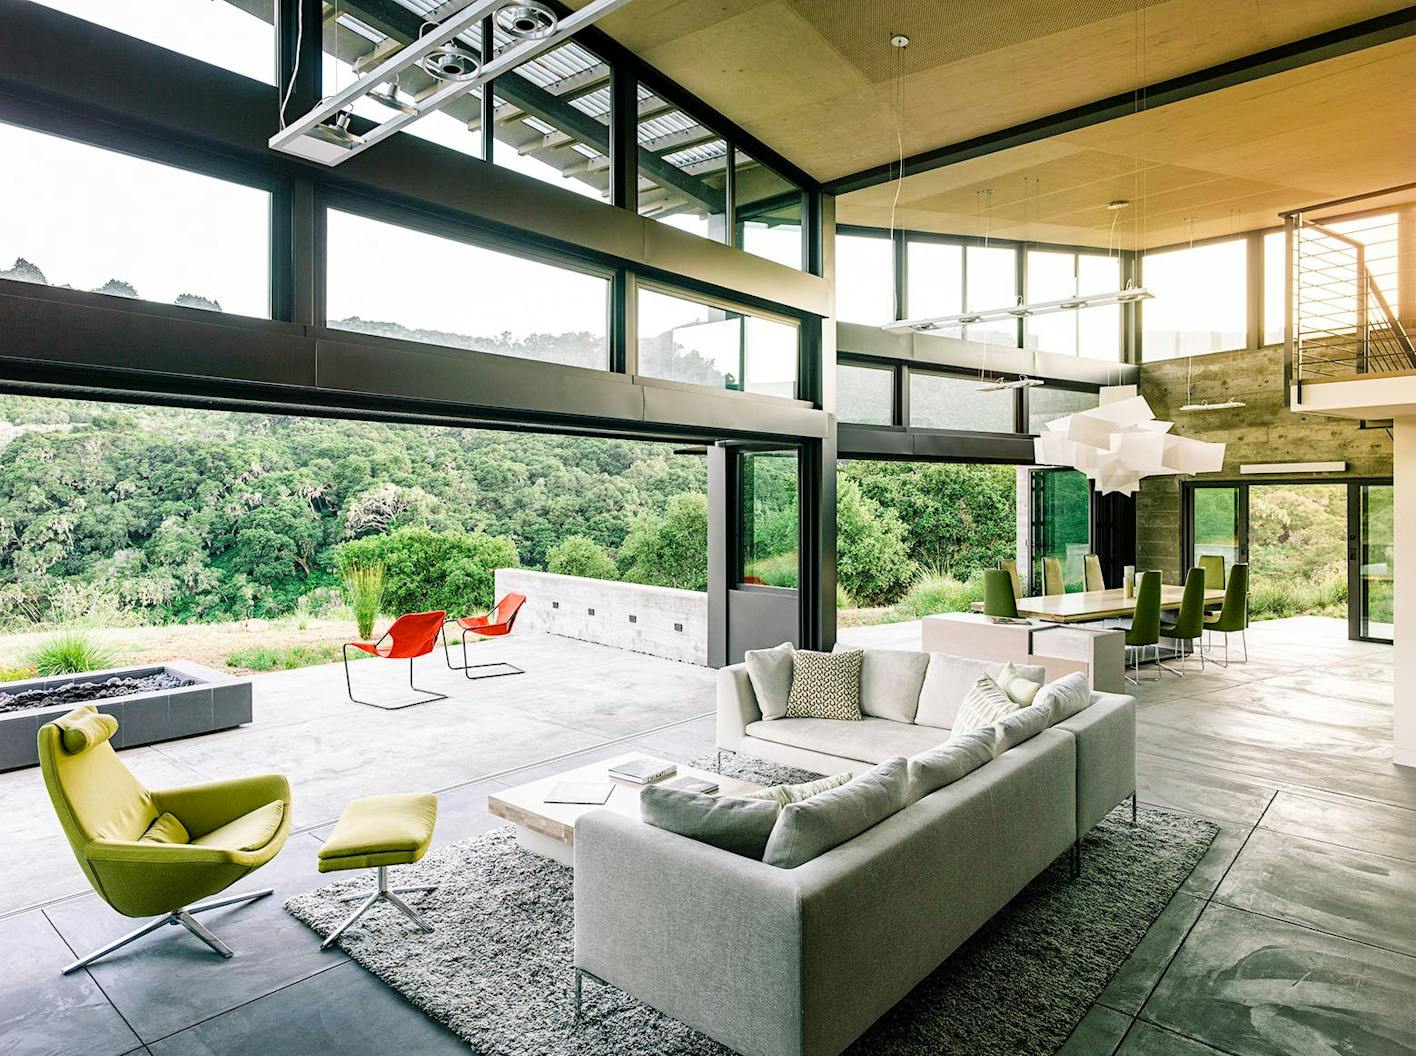 design inspiration in this serene home in Carmel California with folding glass walls